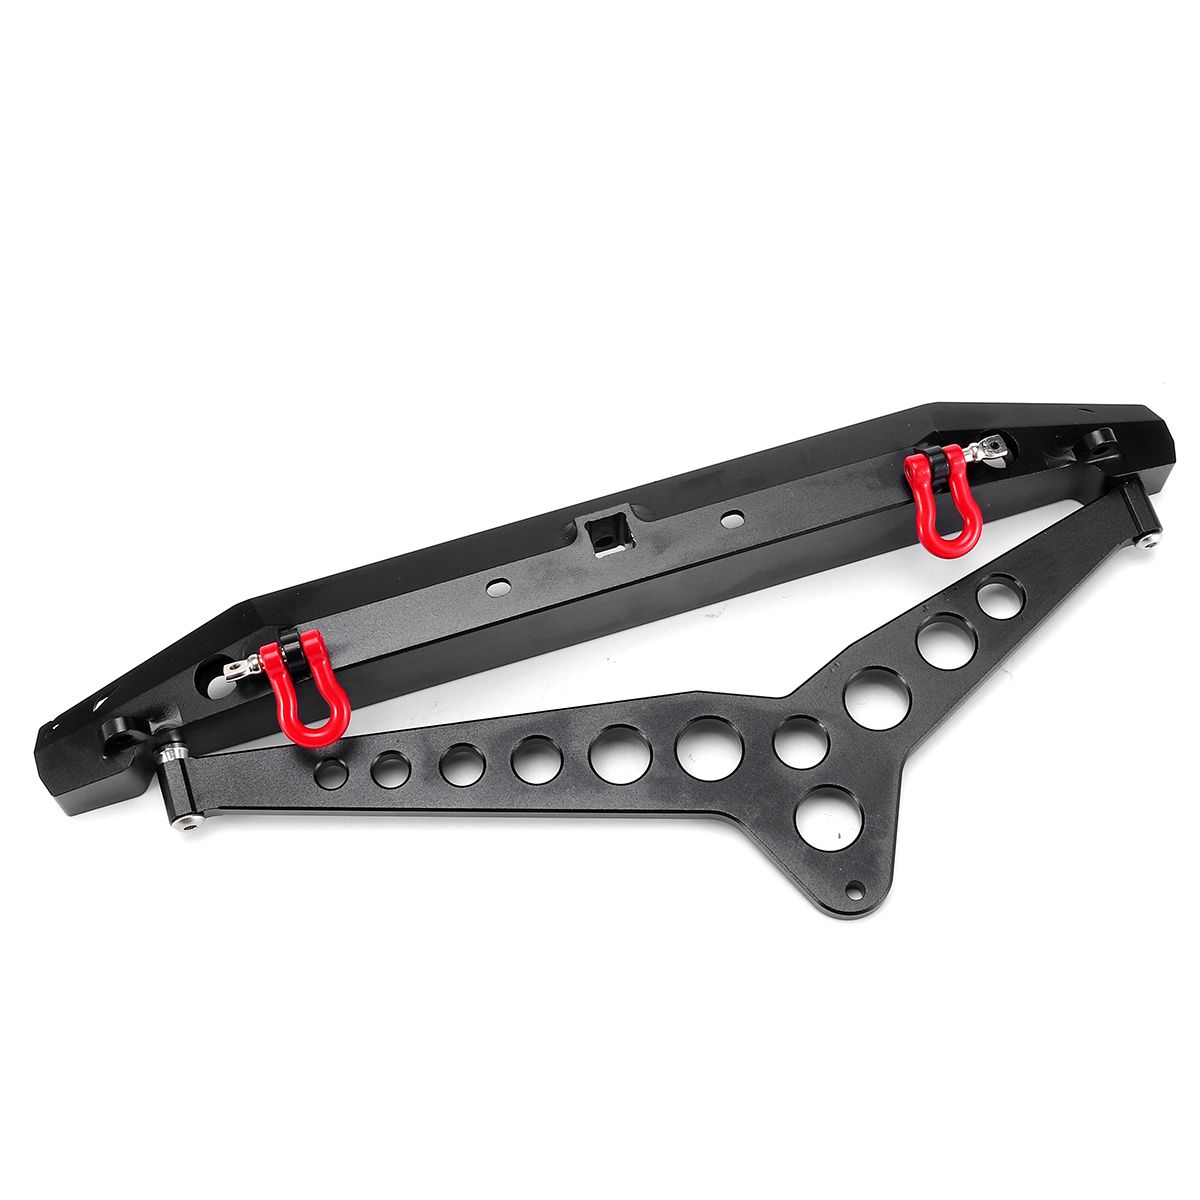 Black-Alloy-Rear-Bumper-Protector-with-LED-Light-for-Traxxas-TRX4-1302031